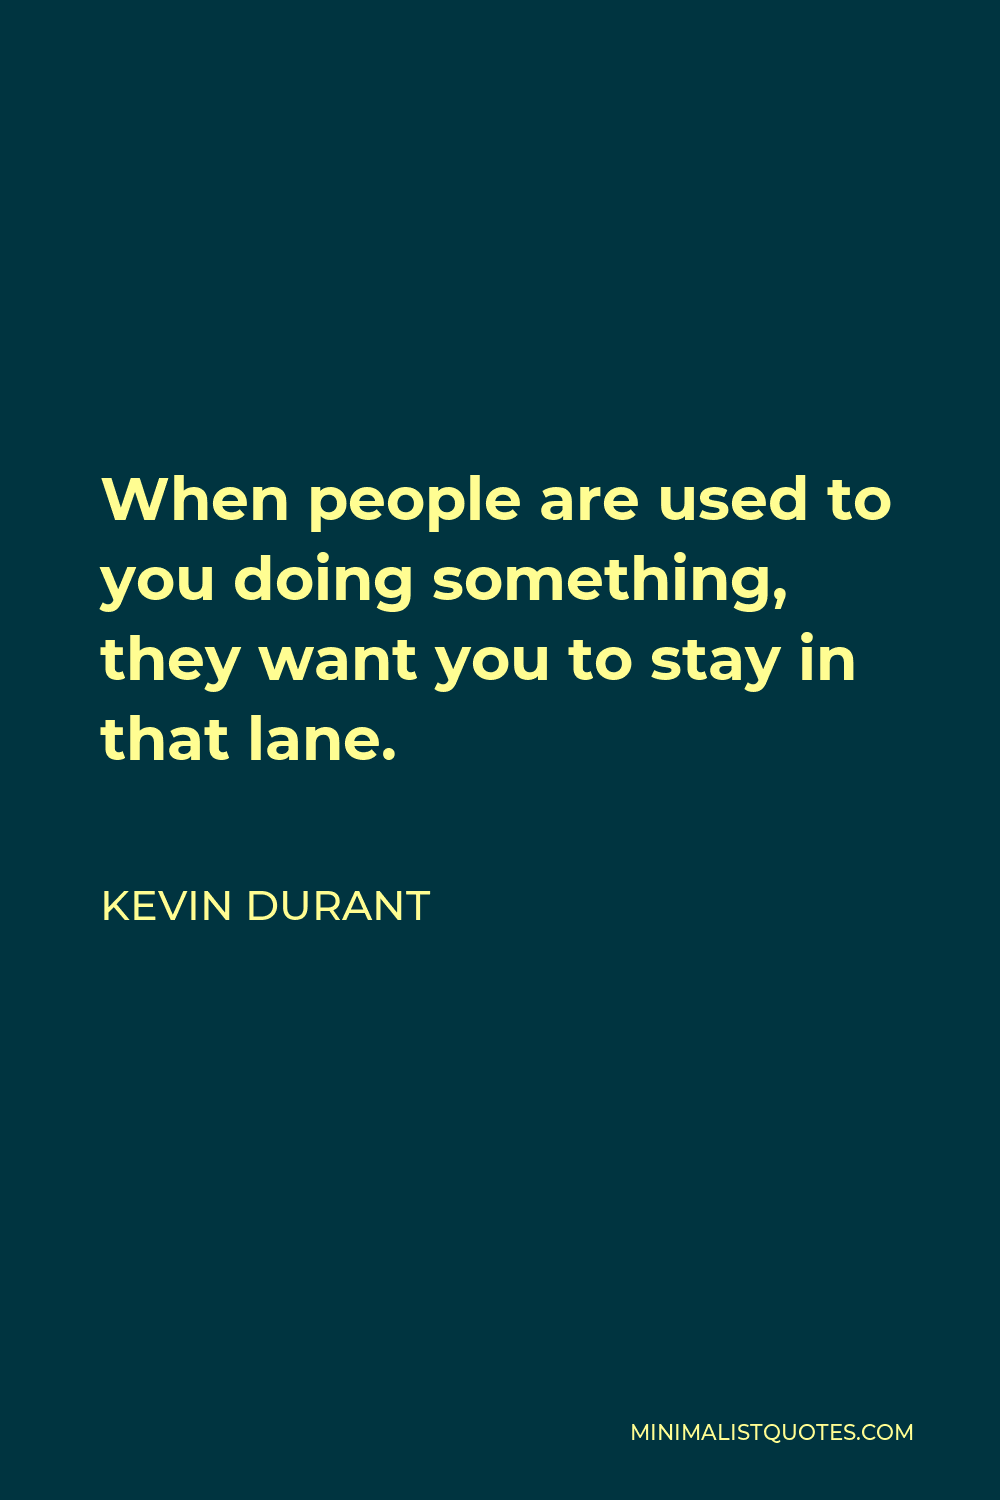 Kevin Durant Quote - When people are used to you doing something, they want you to stay in that lane.